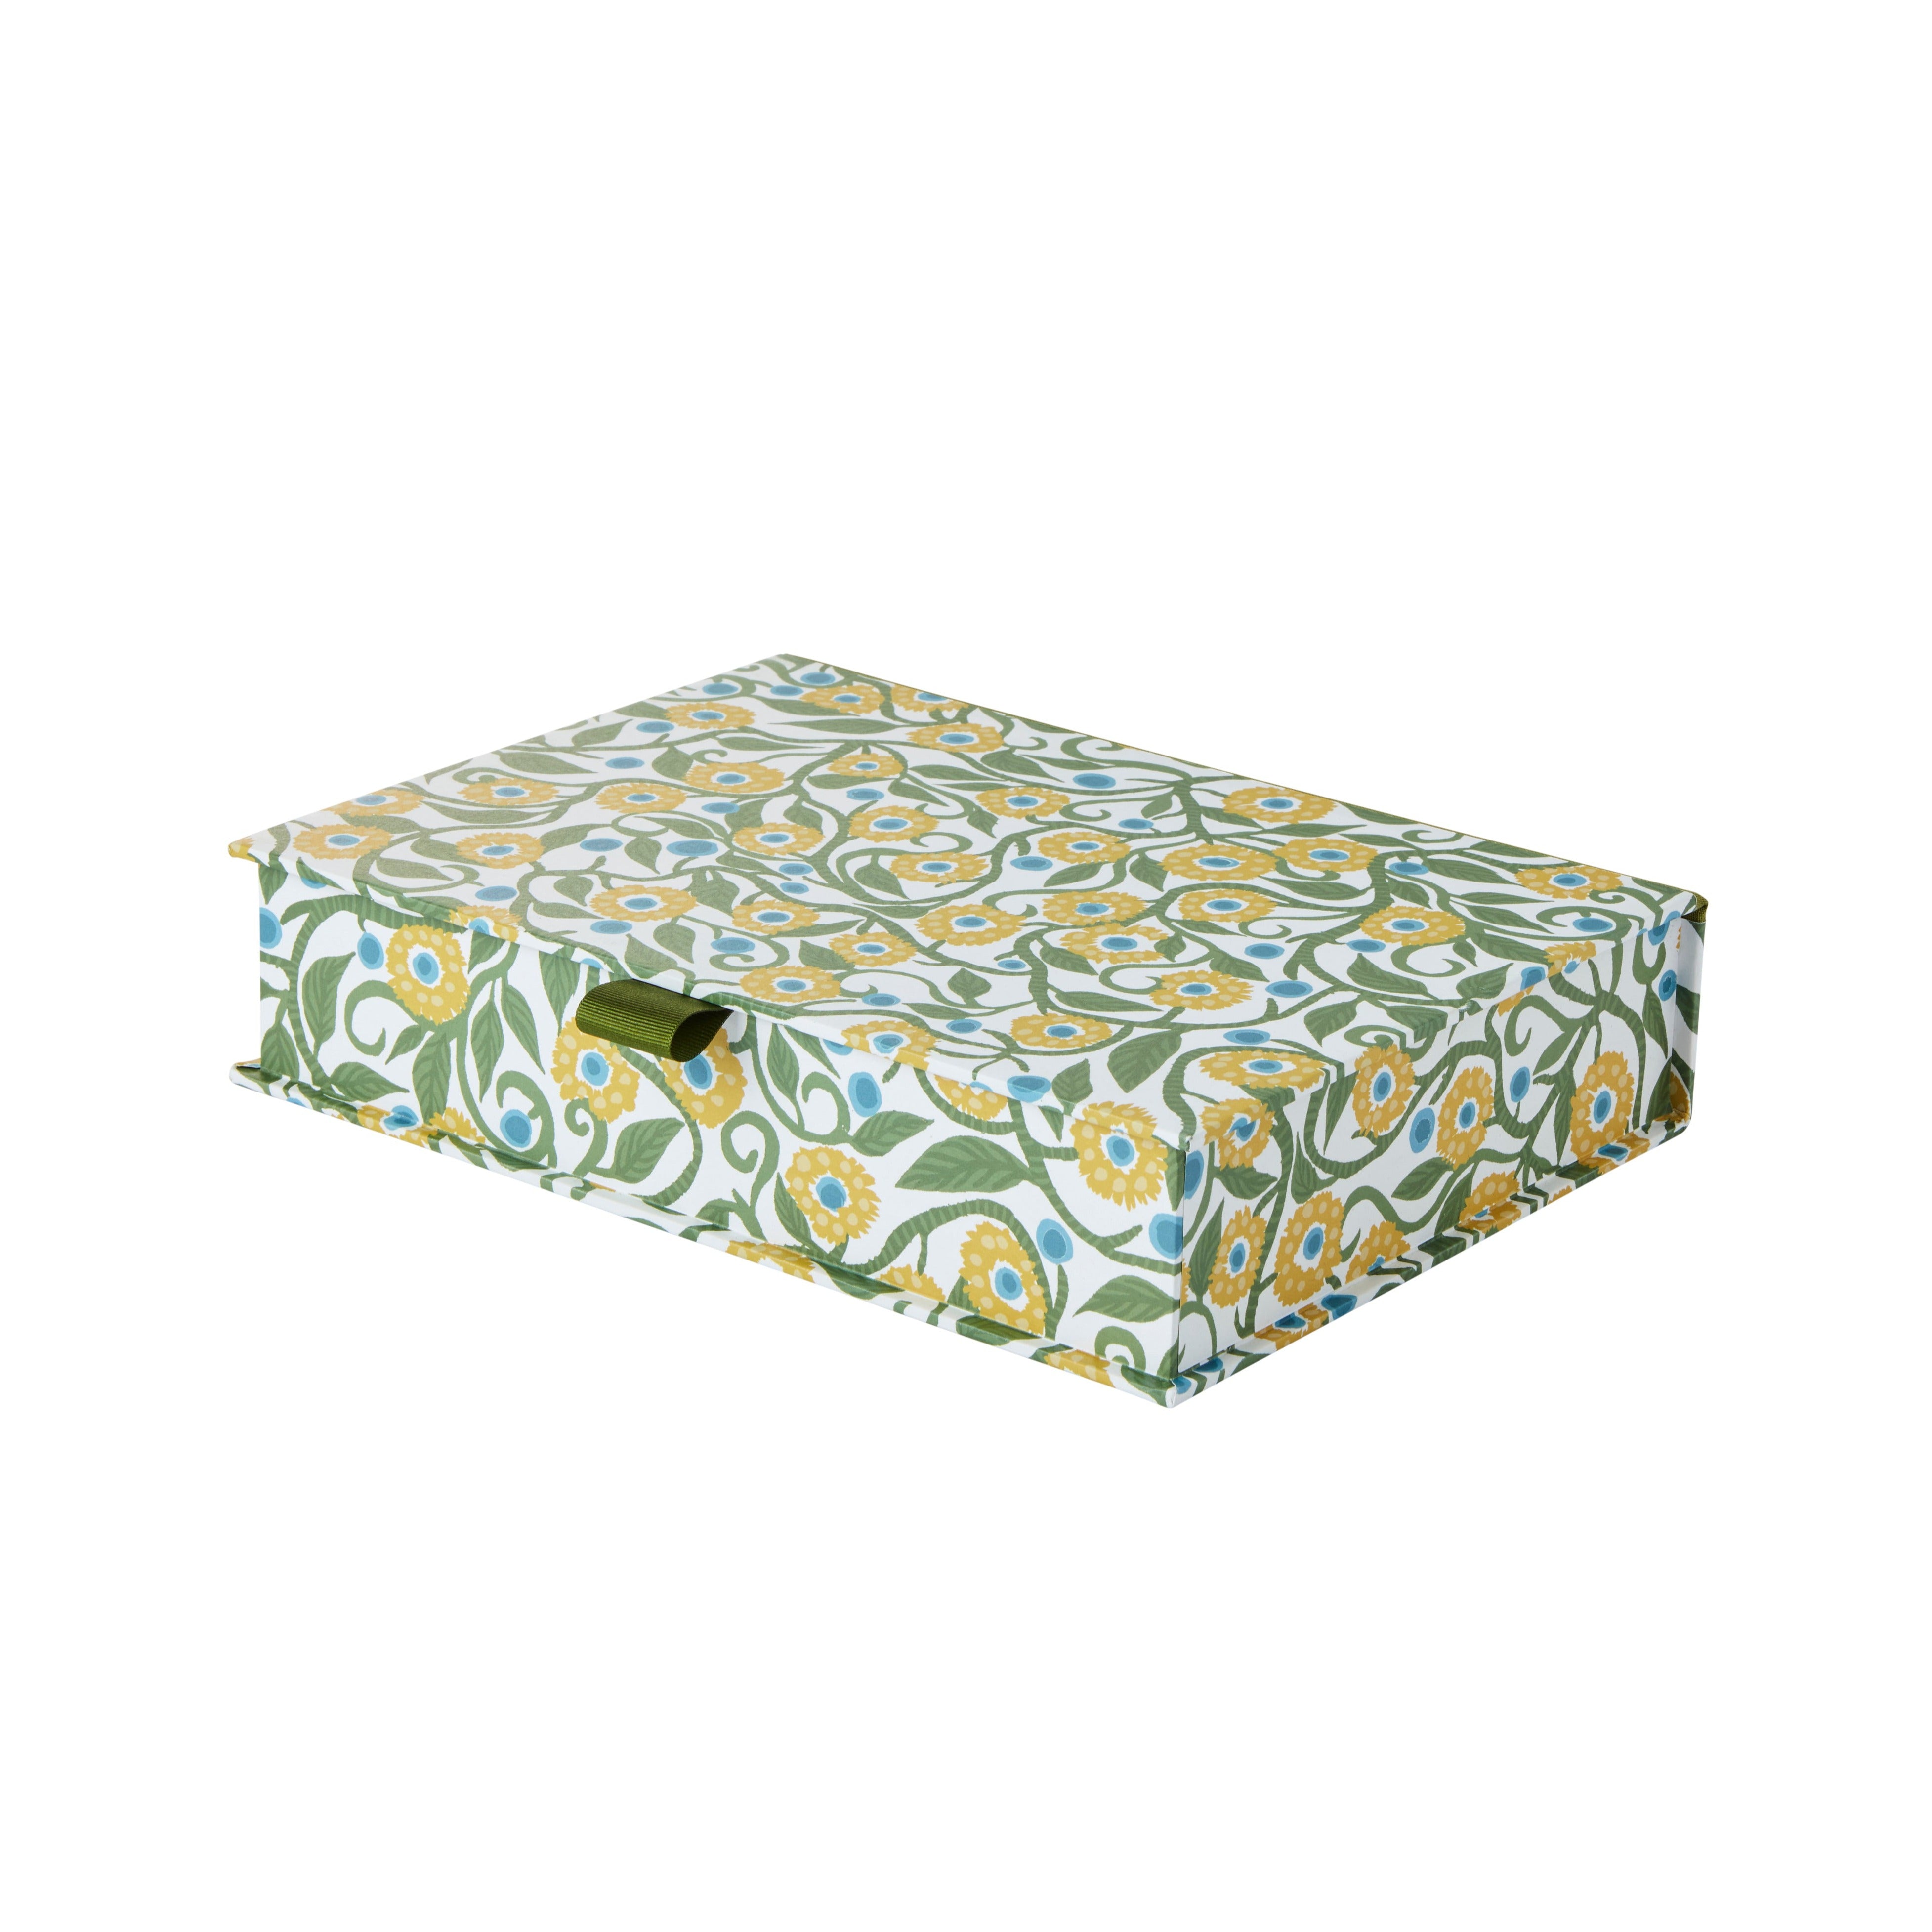 Nina Campbell A5 Keepsake Box in yellow and green colour way stationery collection on white background